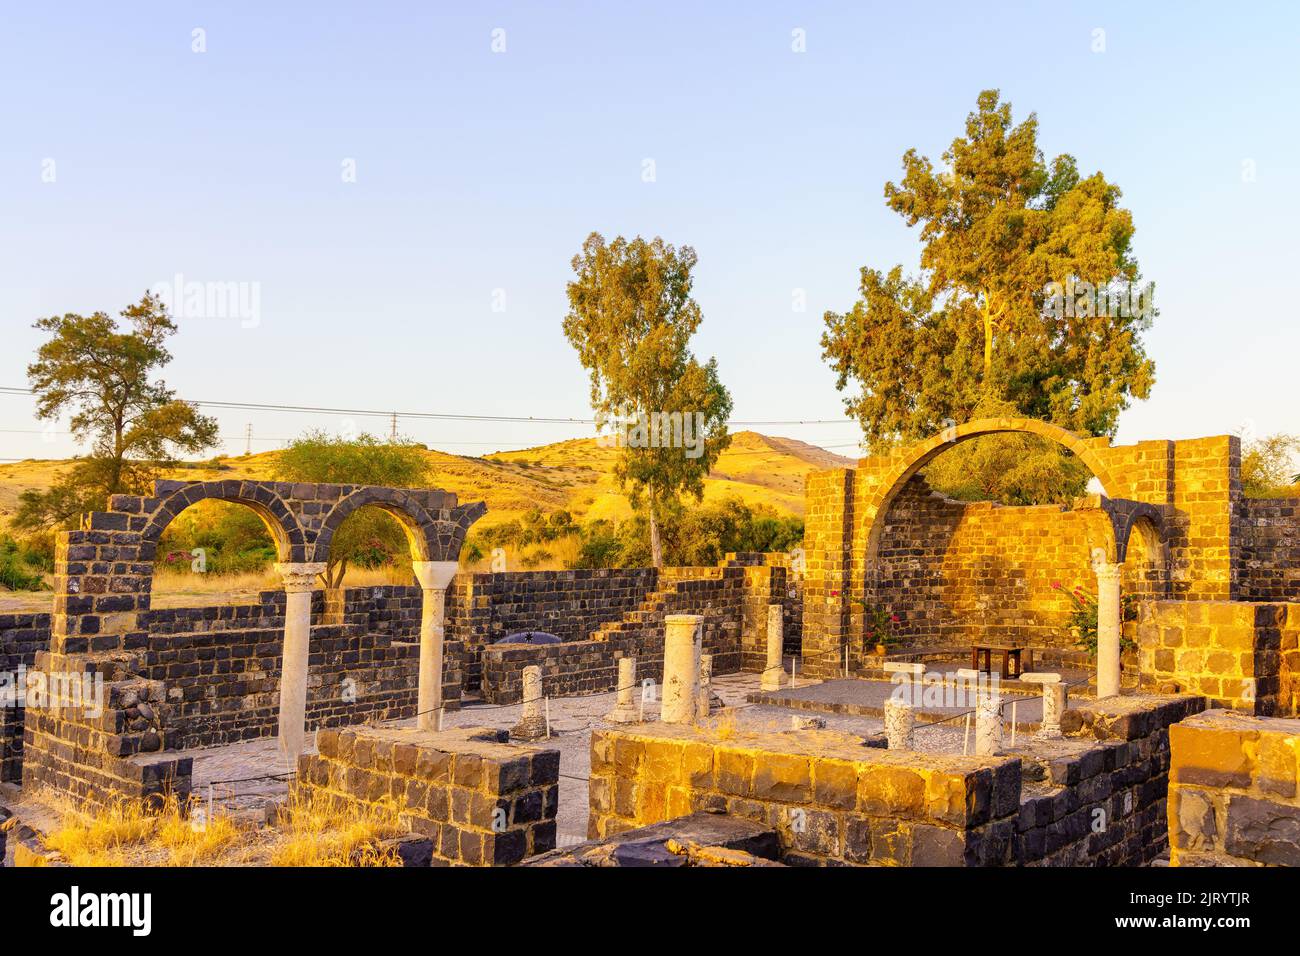 View of ruins of the Byzantine monastery and church, in Kursi National Park, traditionally the site of the Miracle of the Swine. Northern Israel Stock Photo